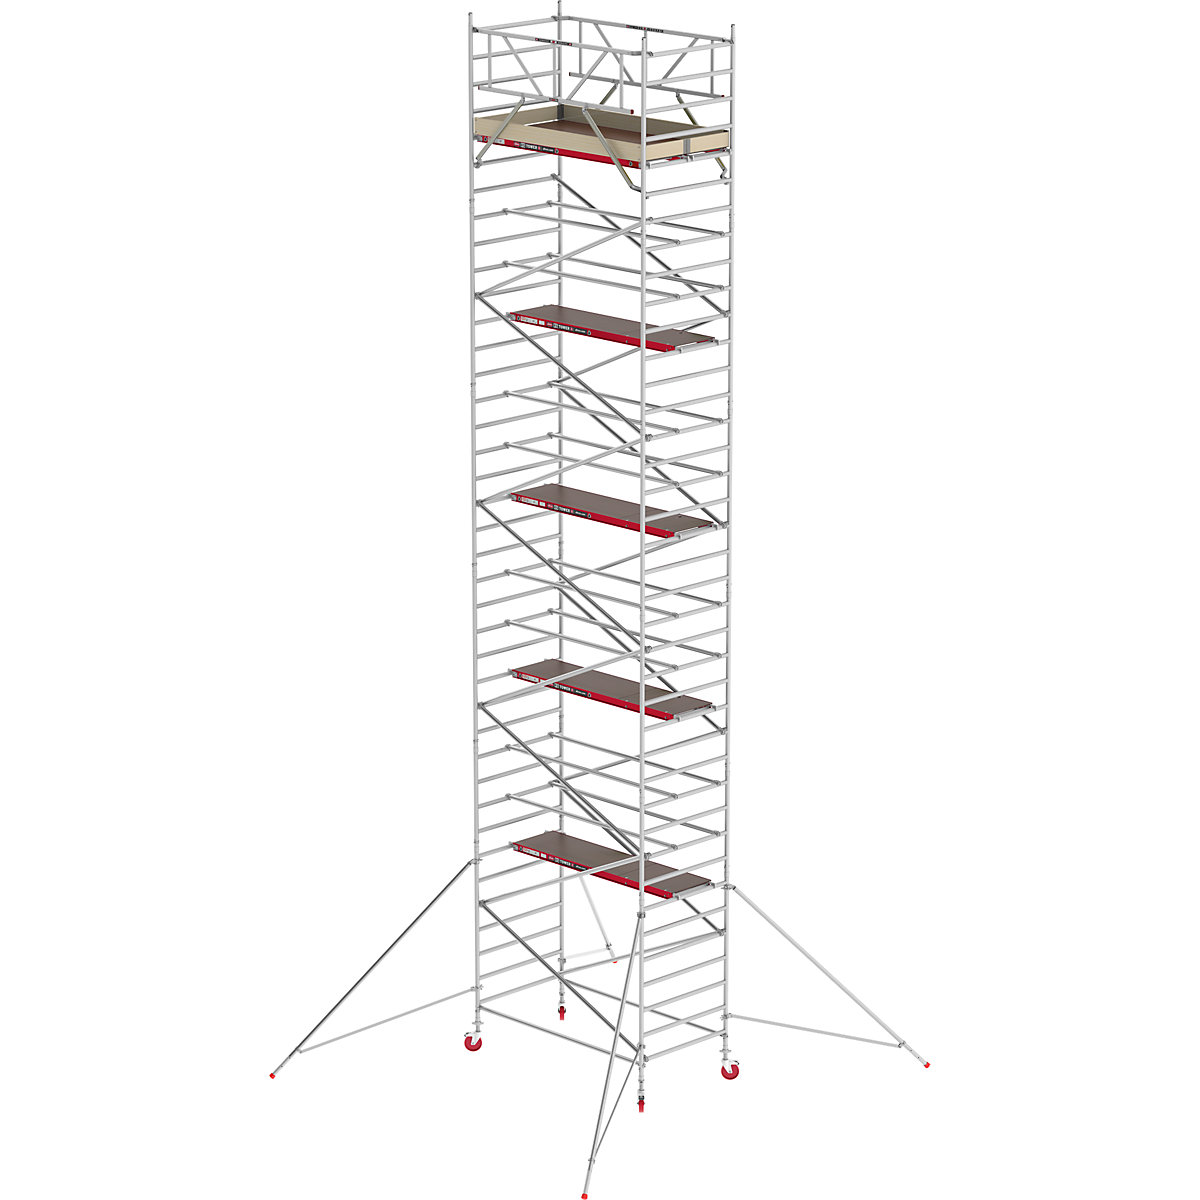 RS TOWER 42 wide mobile access tower – Altrex, wooden platform, length 1.85 m, working height 12.20 m-11